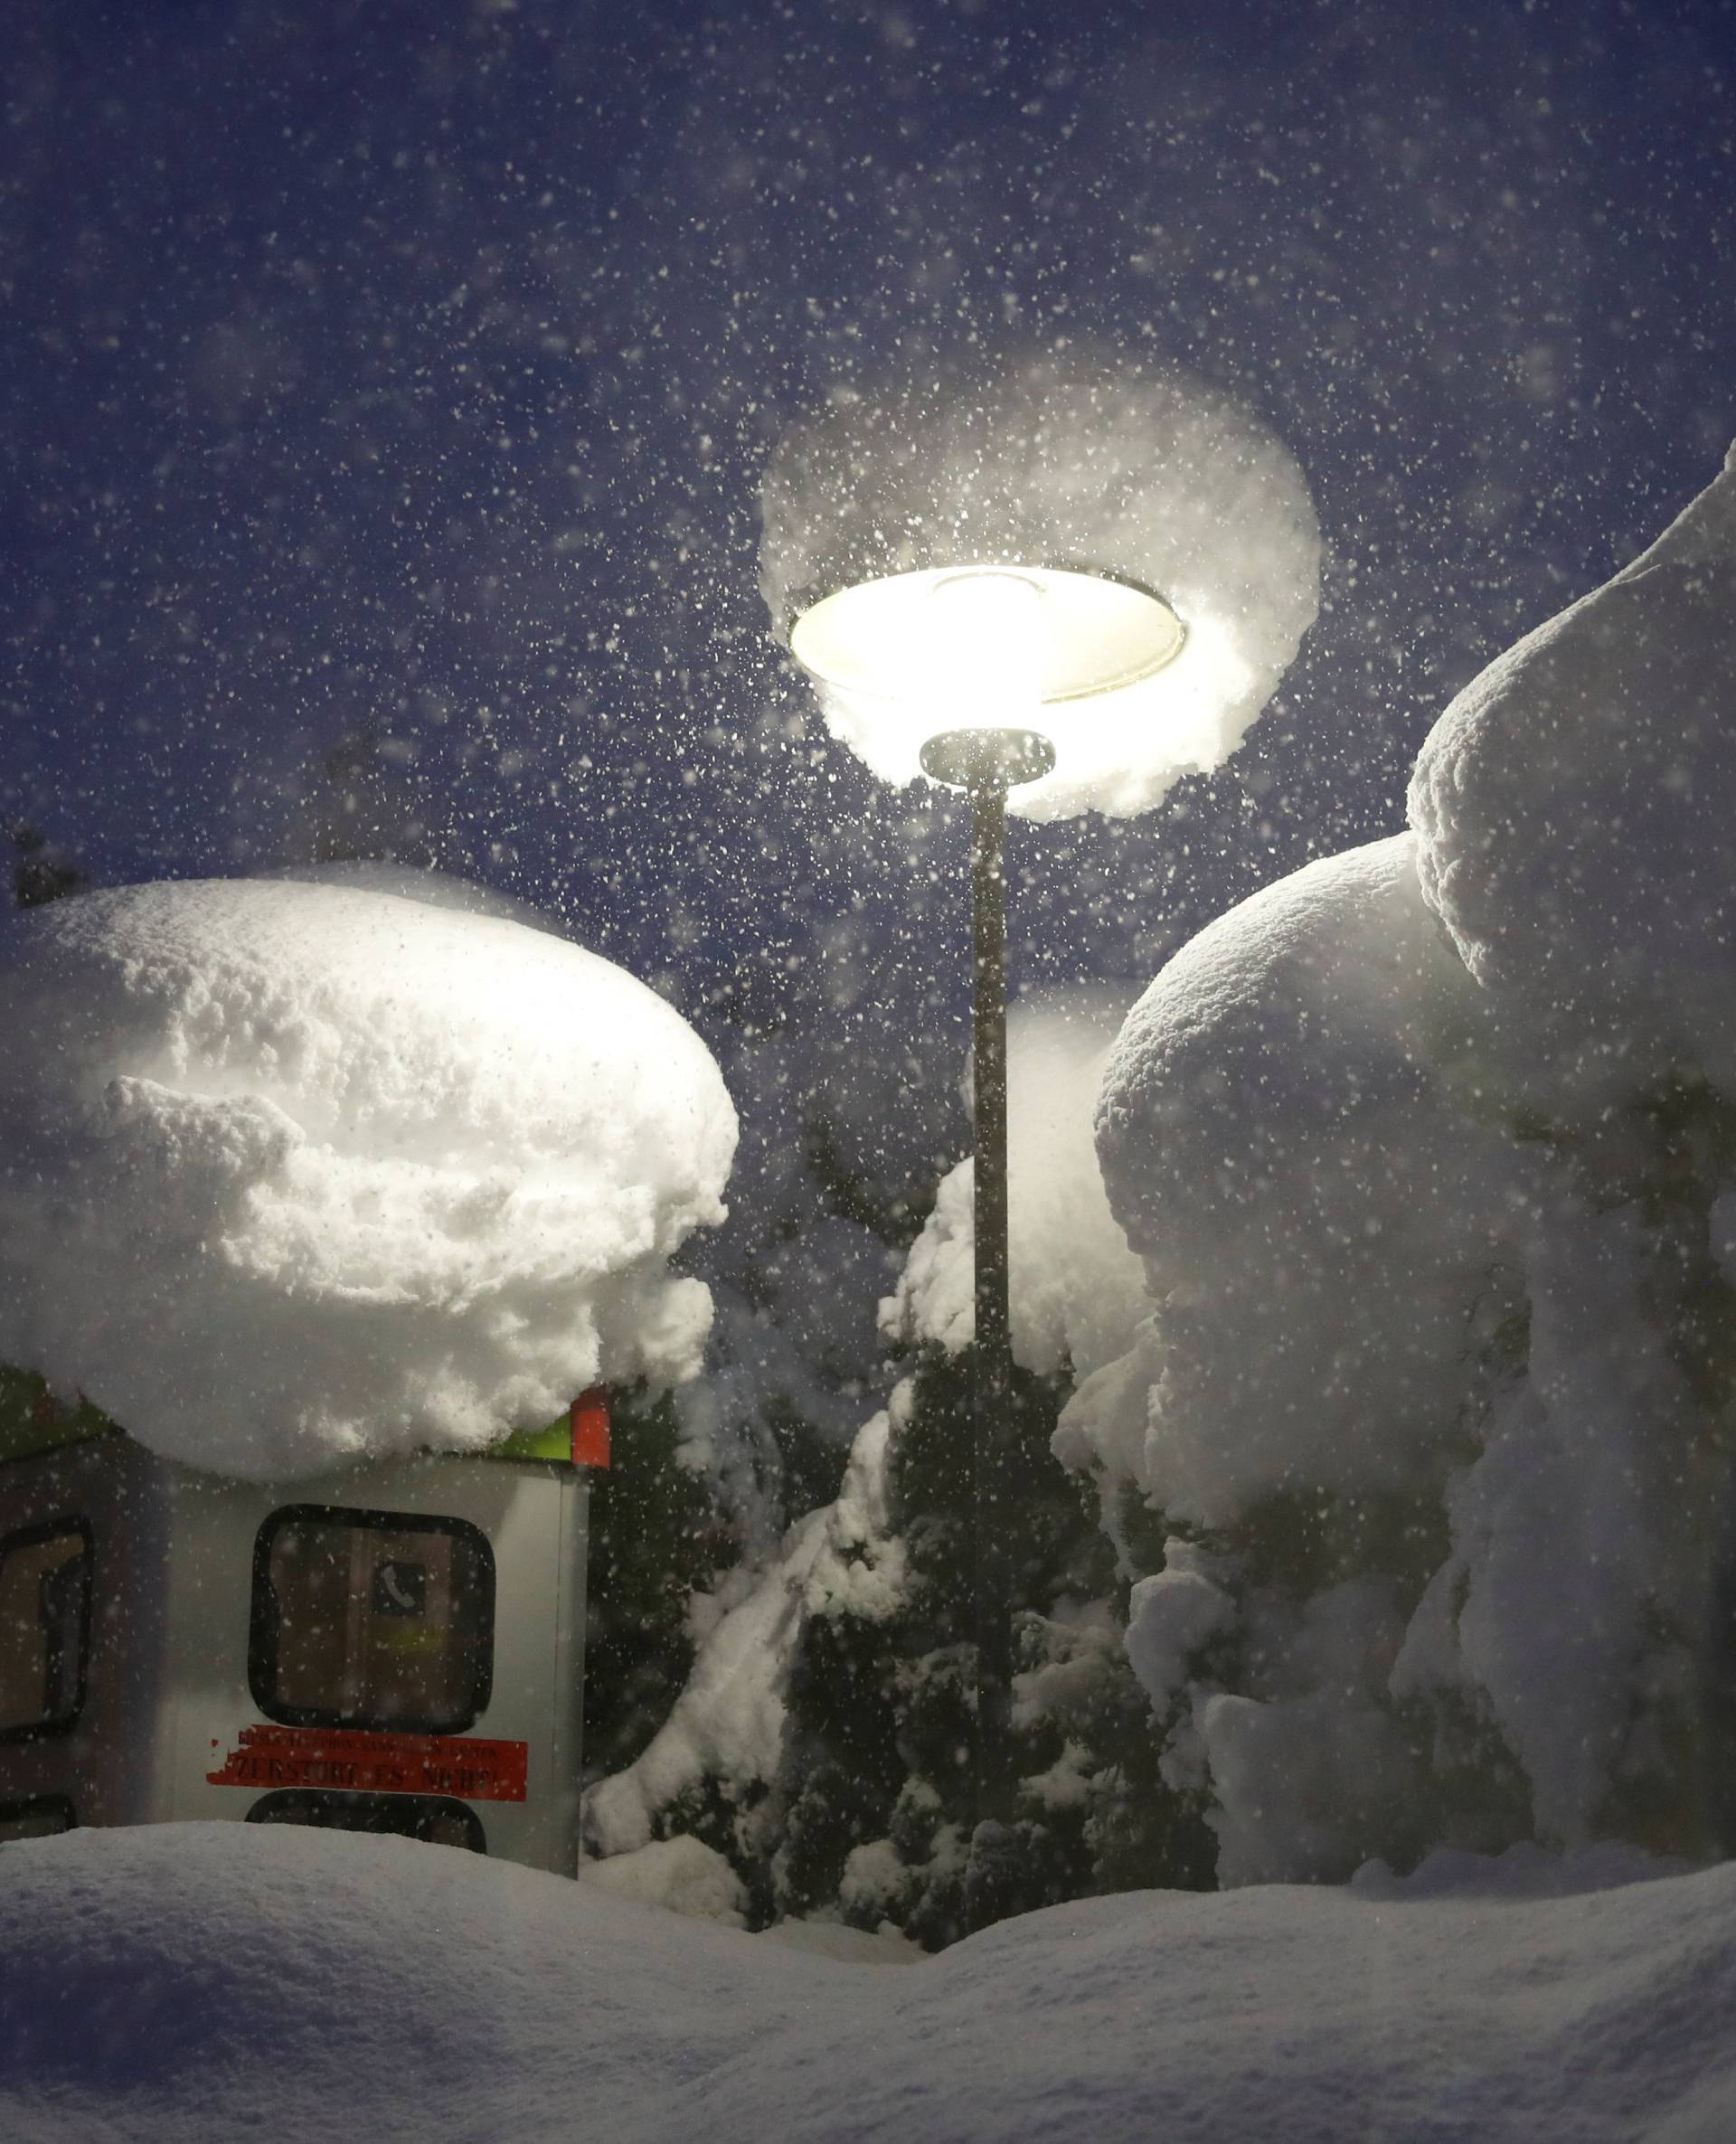 A phone booth is pictured during heavy snowfall in Reitdorf